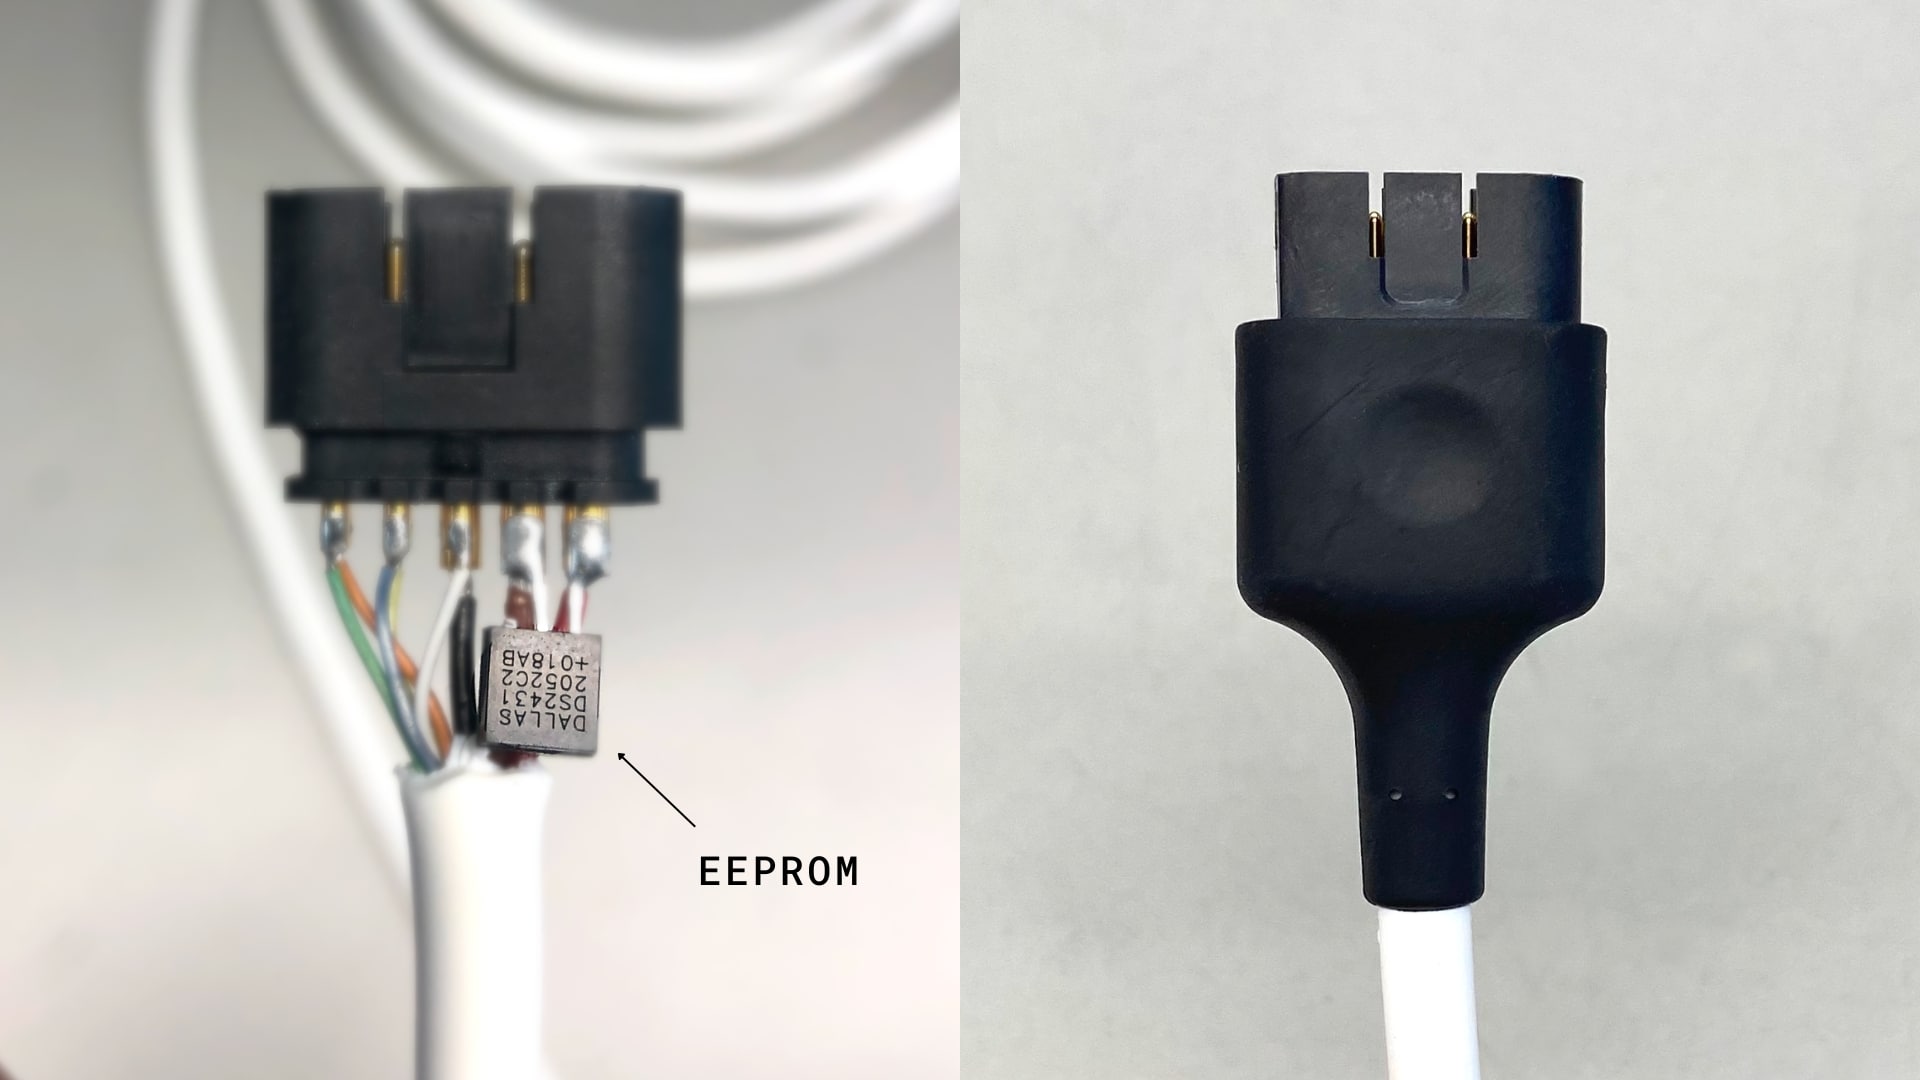 Left: Medical Cable with EEPROM. Right: Medical Cable overmolded.